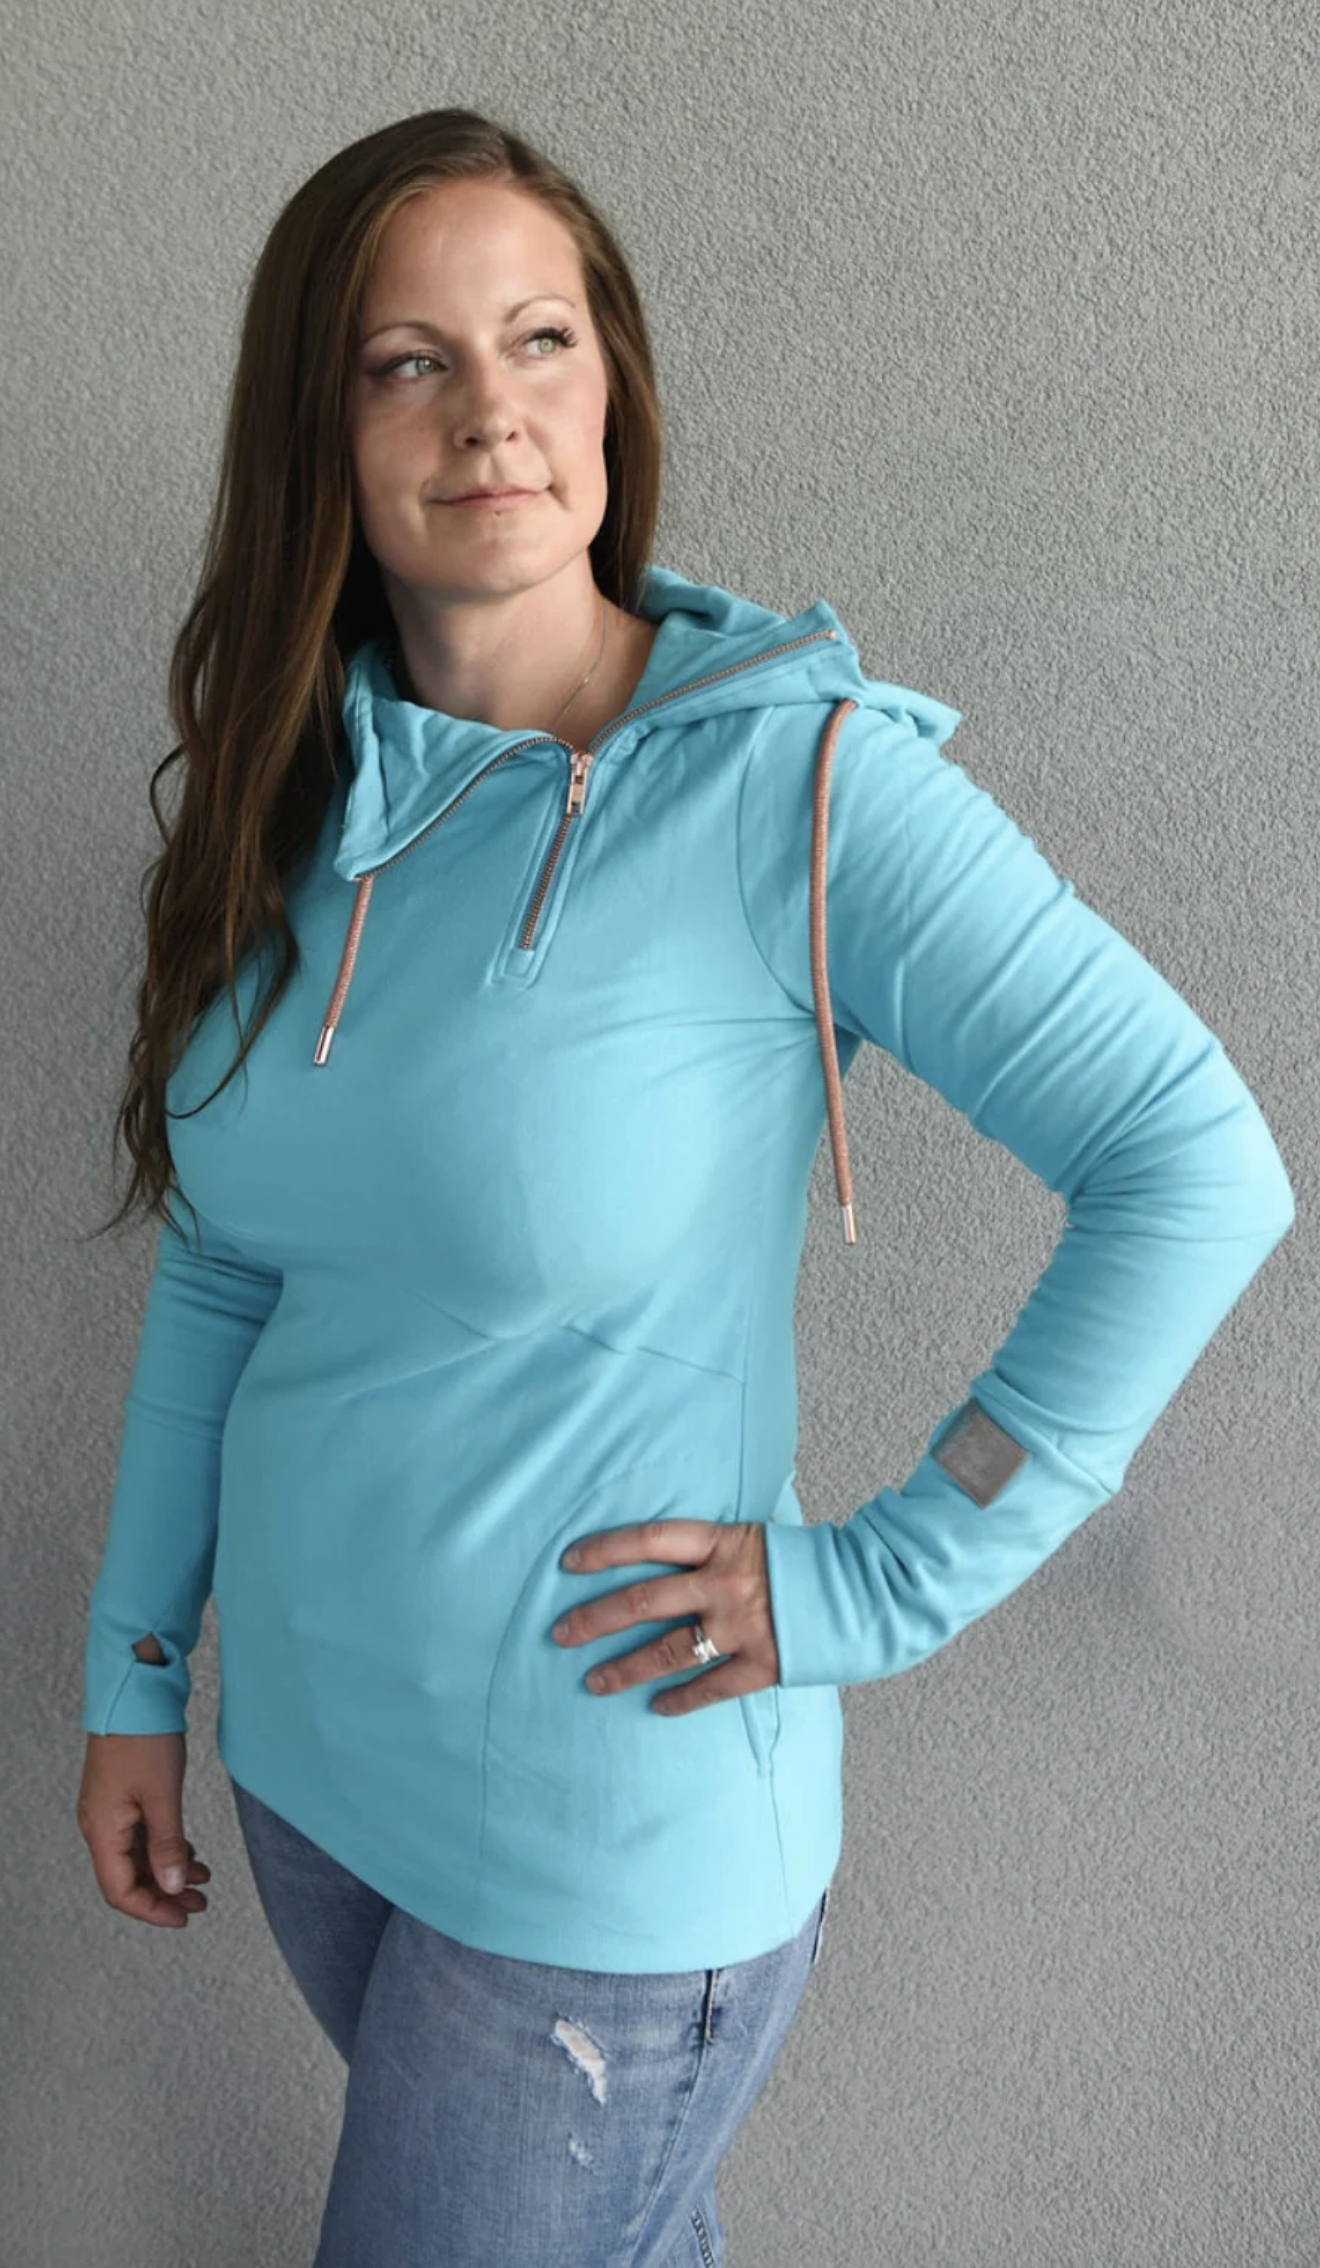 Pink Cement 1/4 Zip- Aqua with Rose Gold